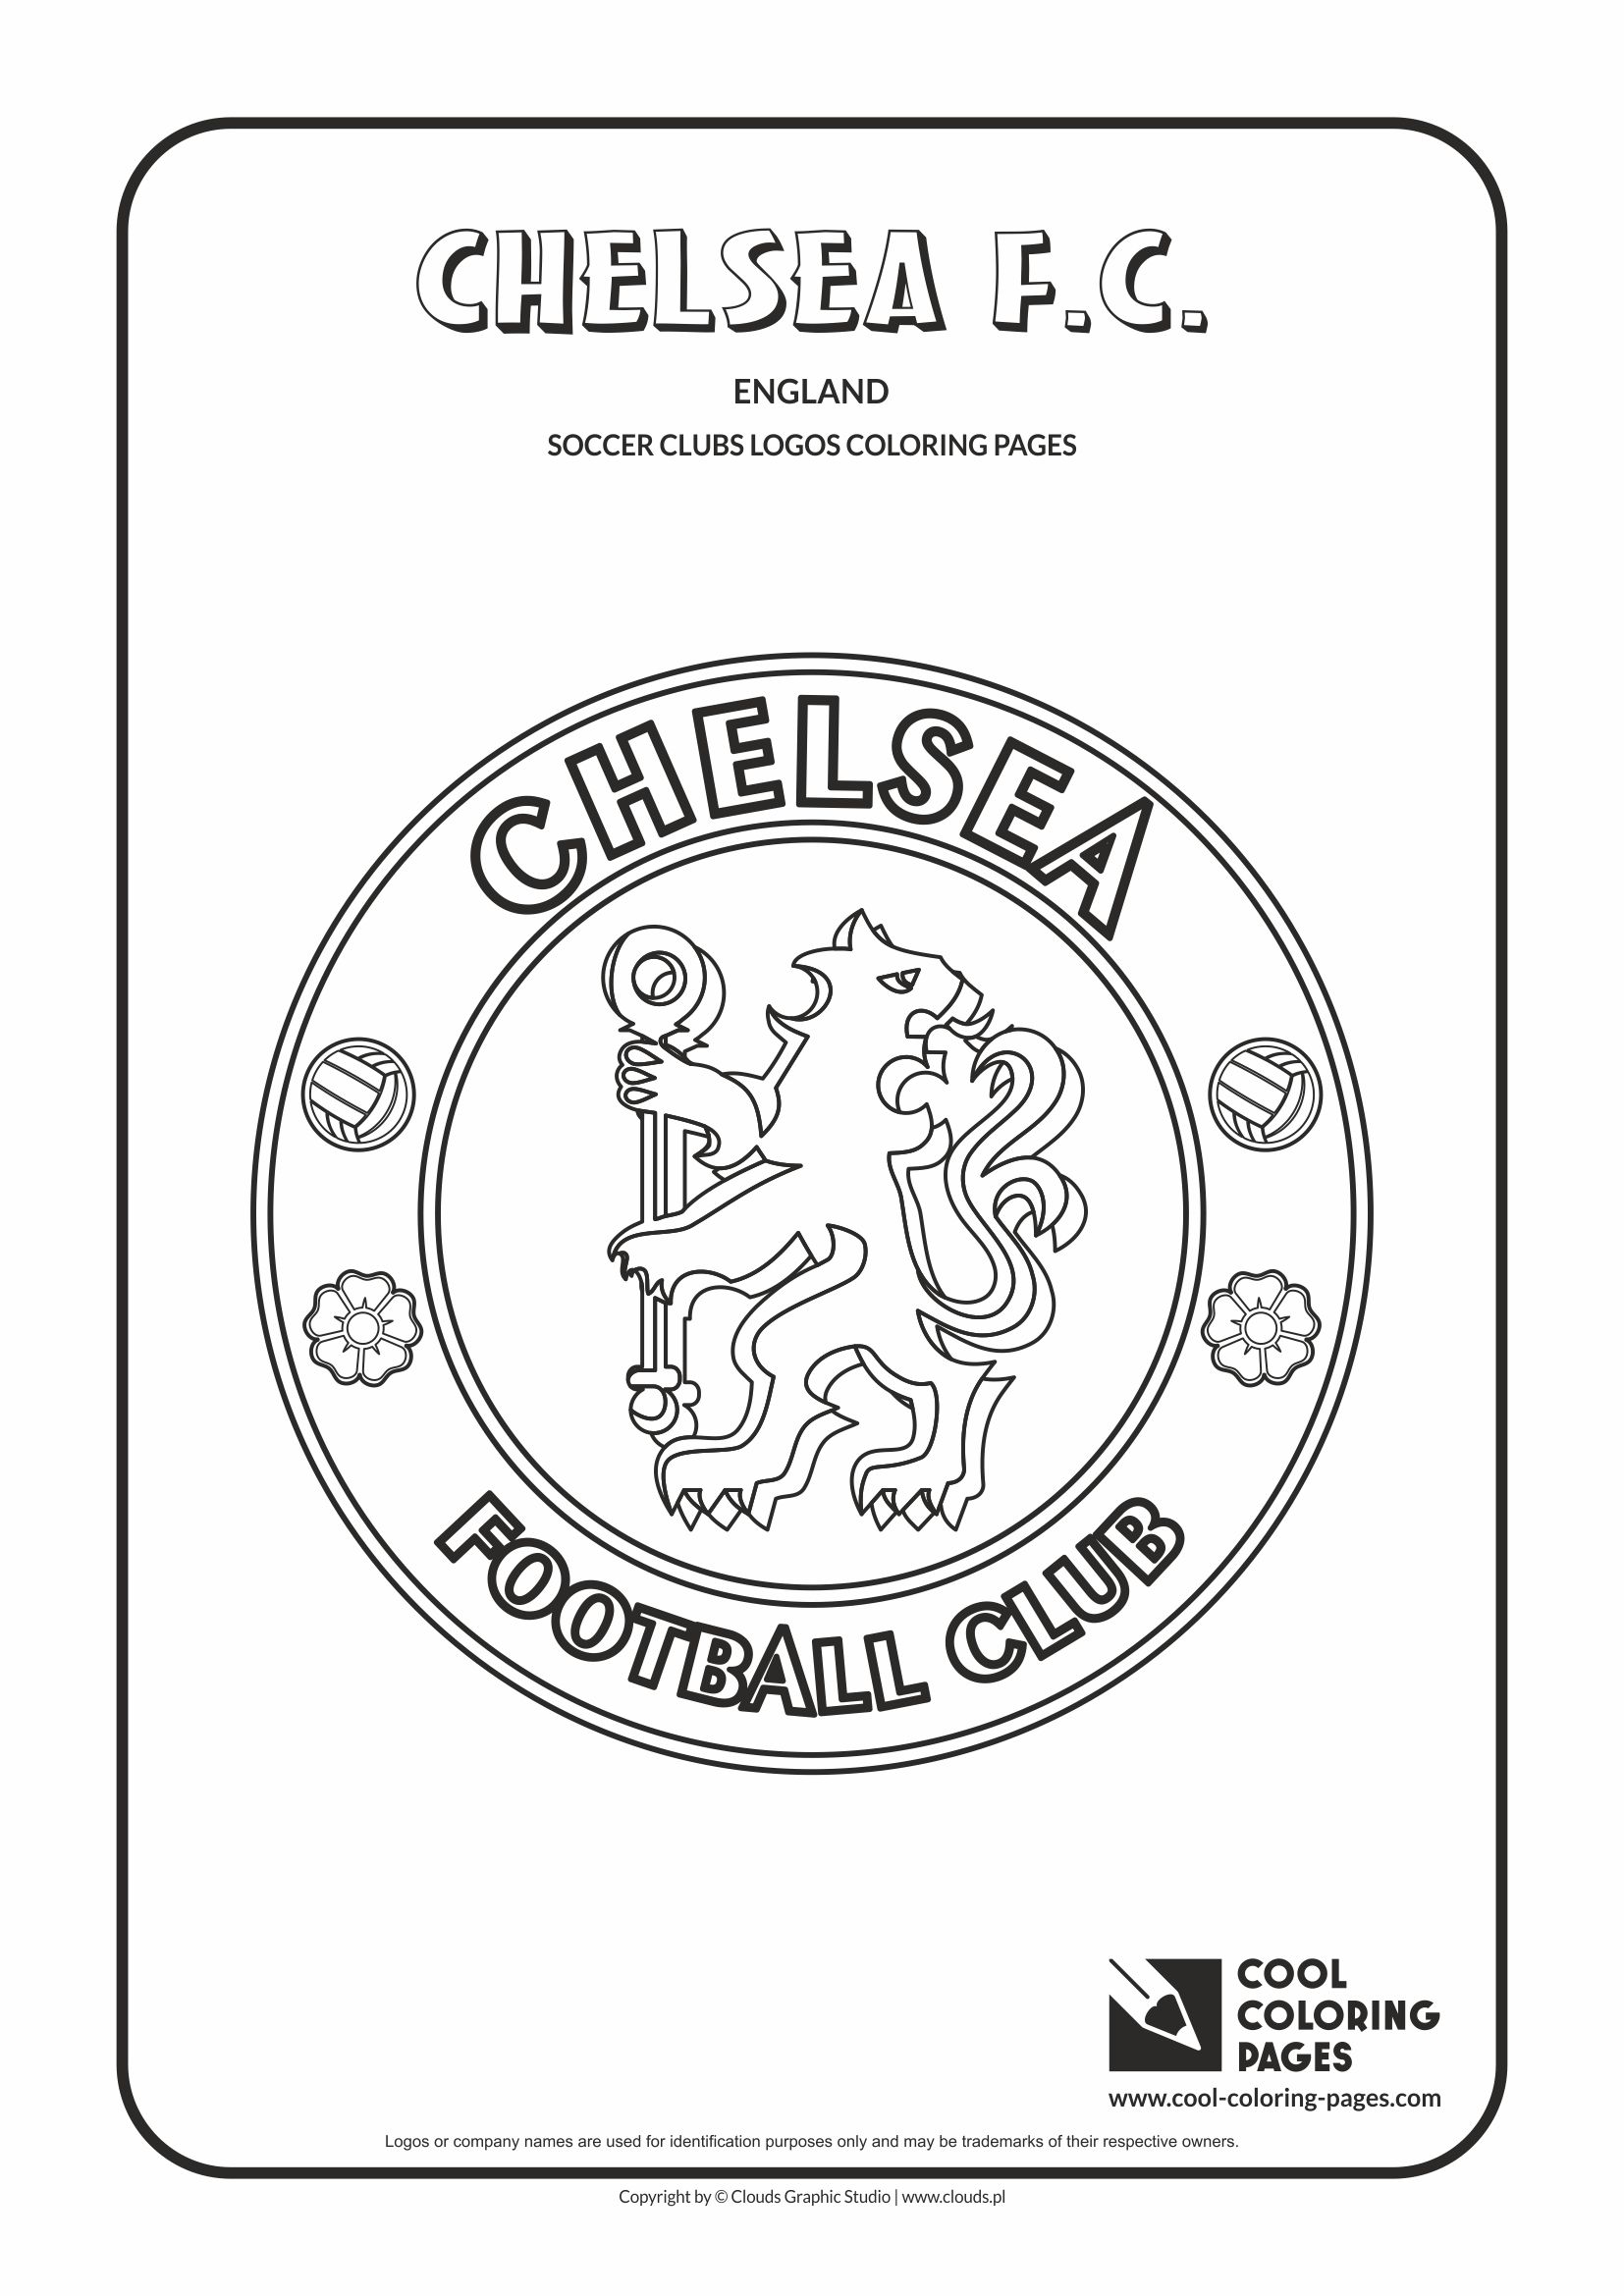 Cool Coloring Pages Chelsea F.C. logo coloring page - Cool Coloring